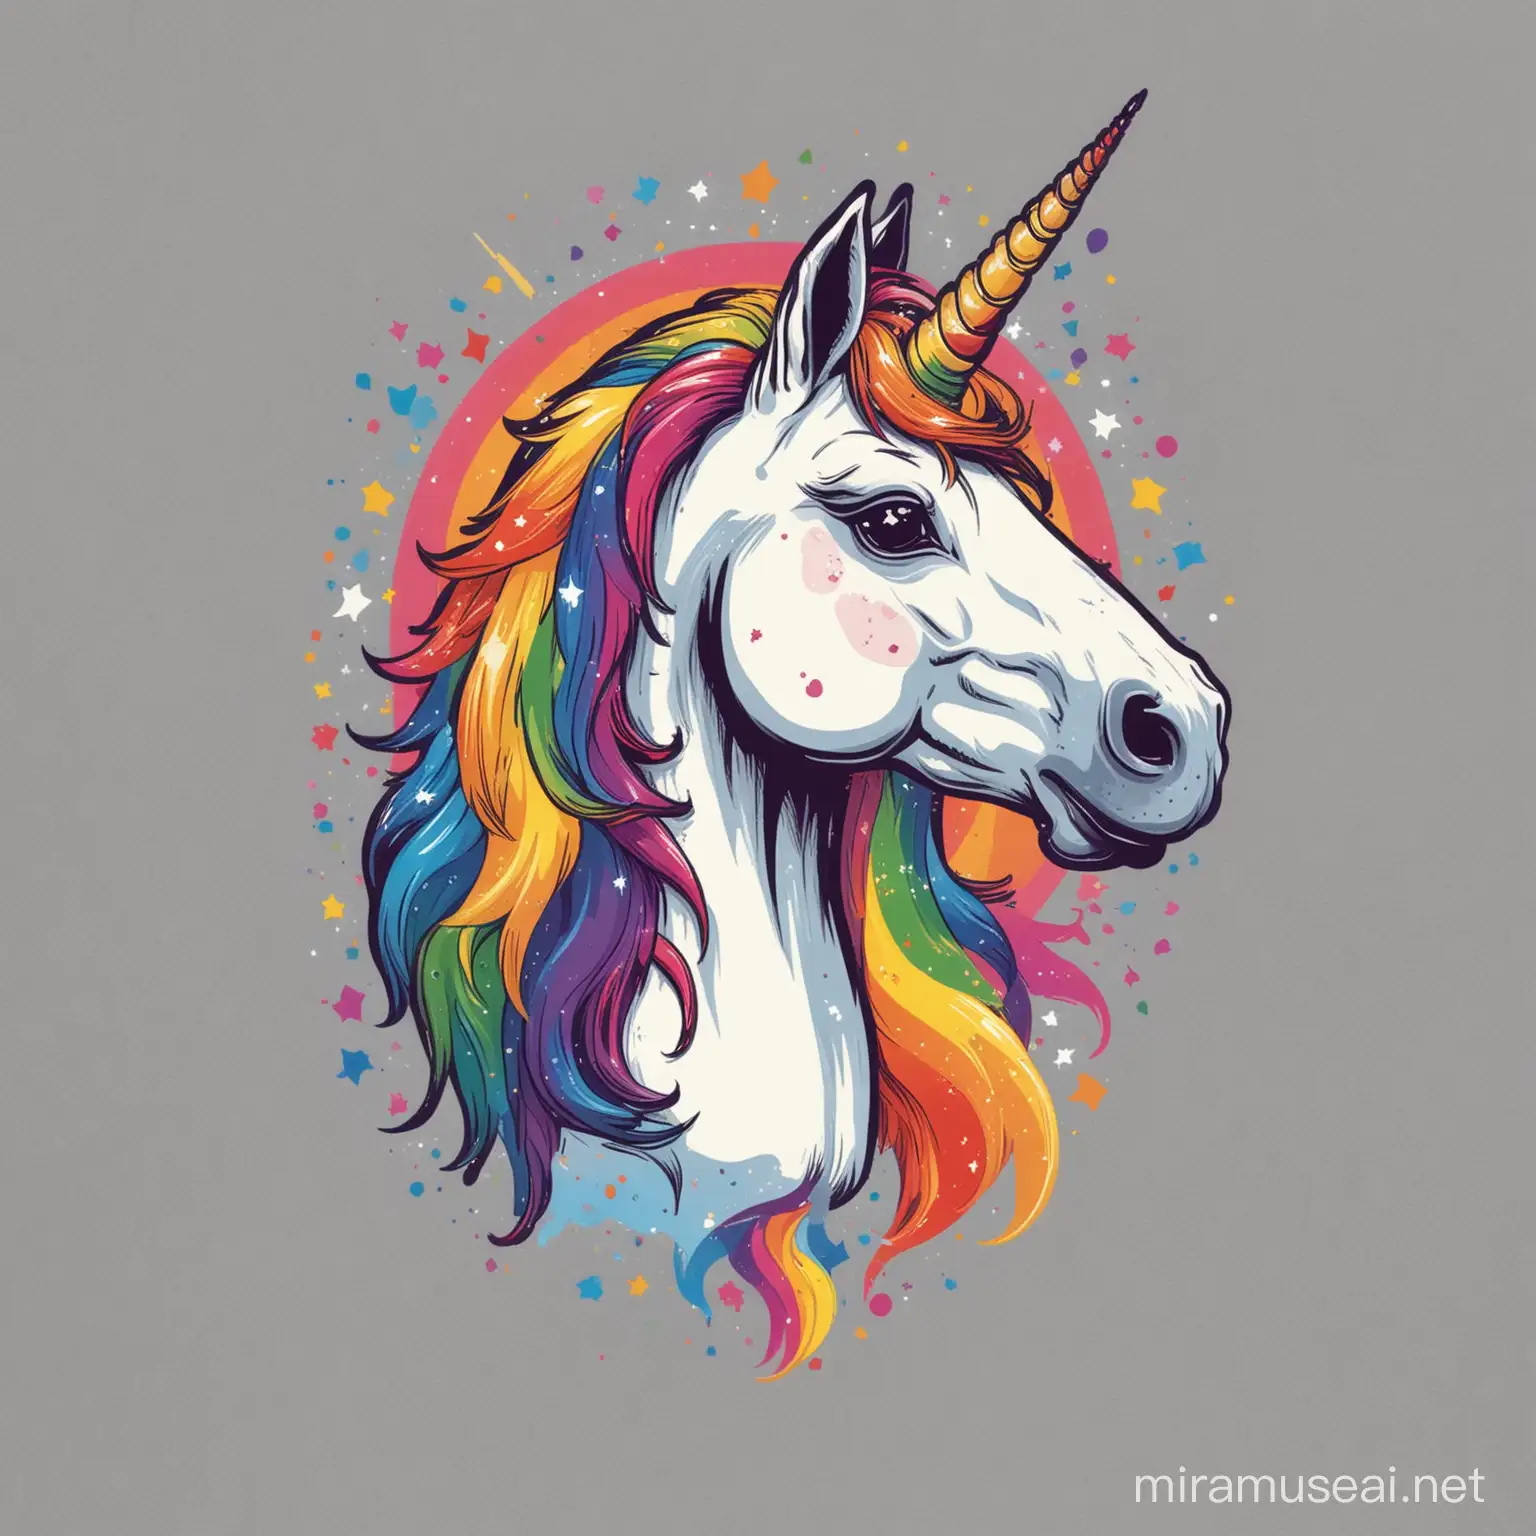 A graphic t-shirt design for a gay apparel brand on a white background NOT on a tshirt. Use a bold, pop art style with vibrant colors. Feature a playful illustration of a unicorn with a rainbow mane